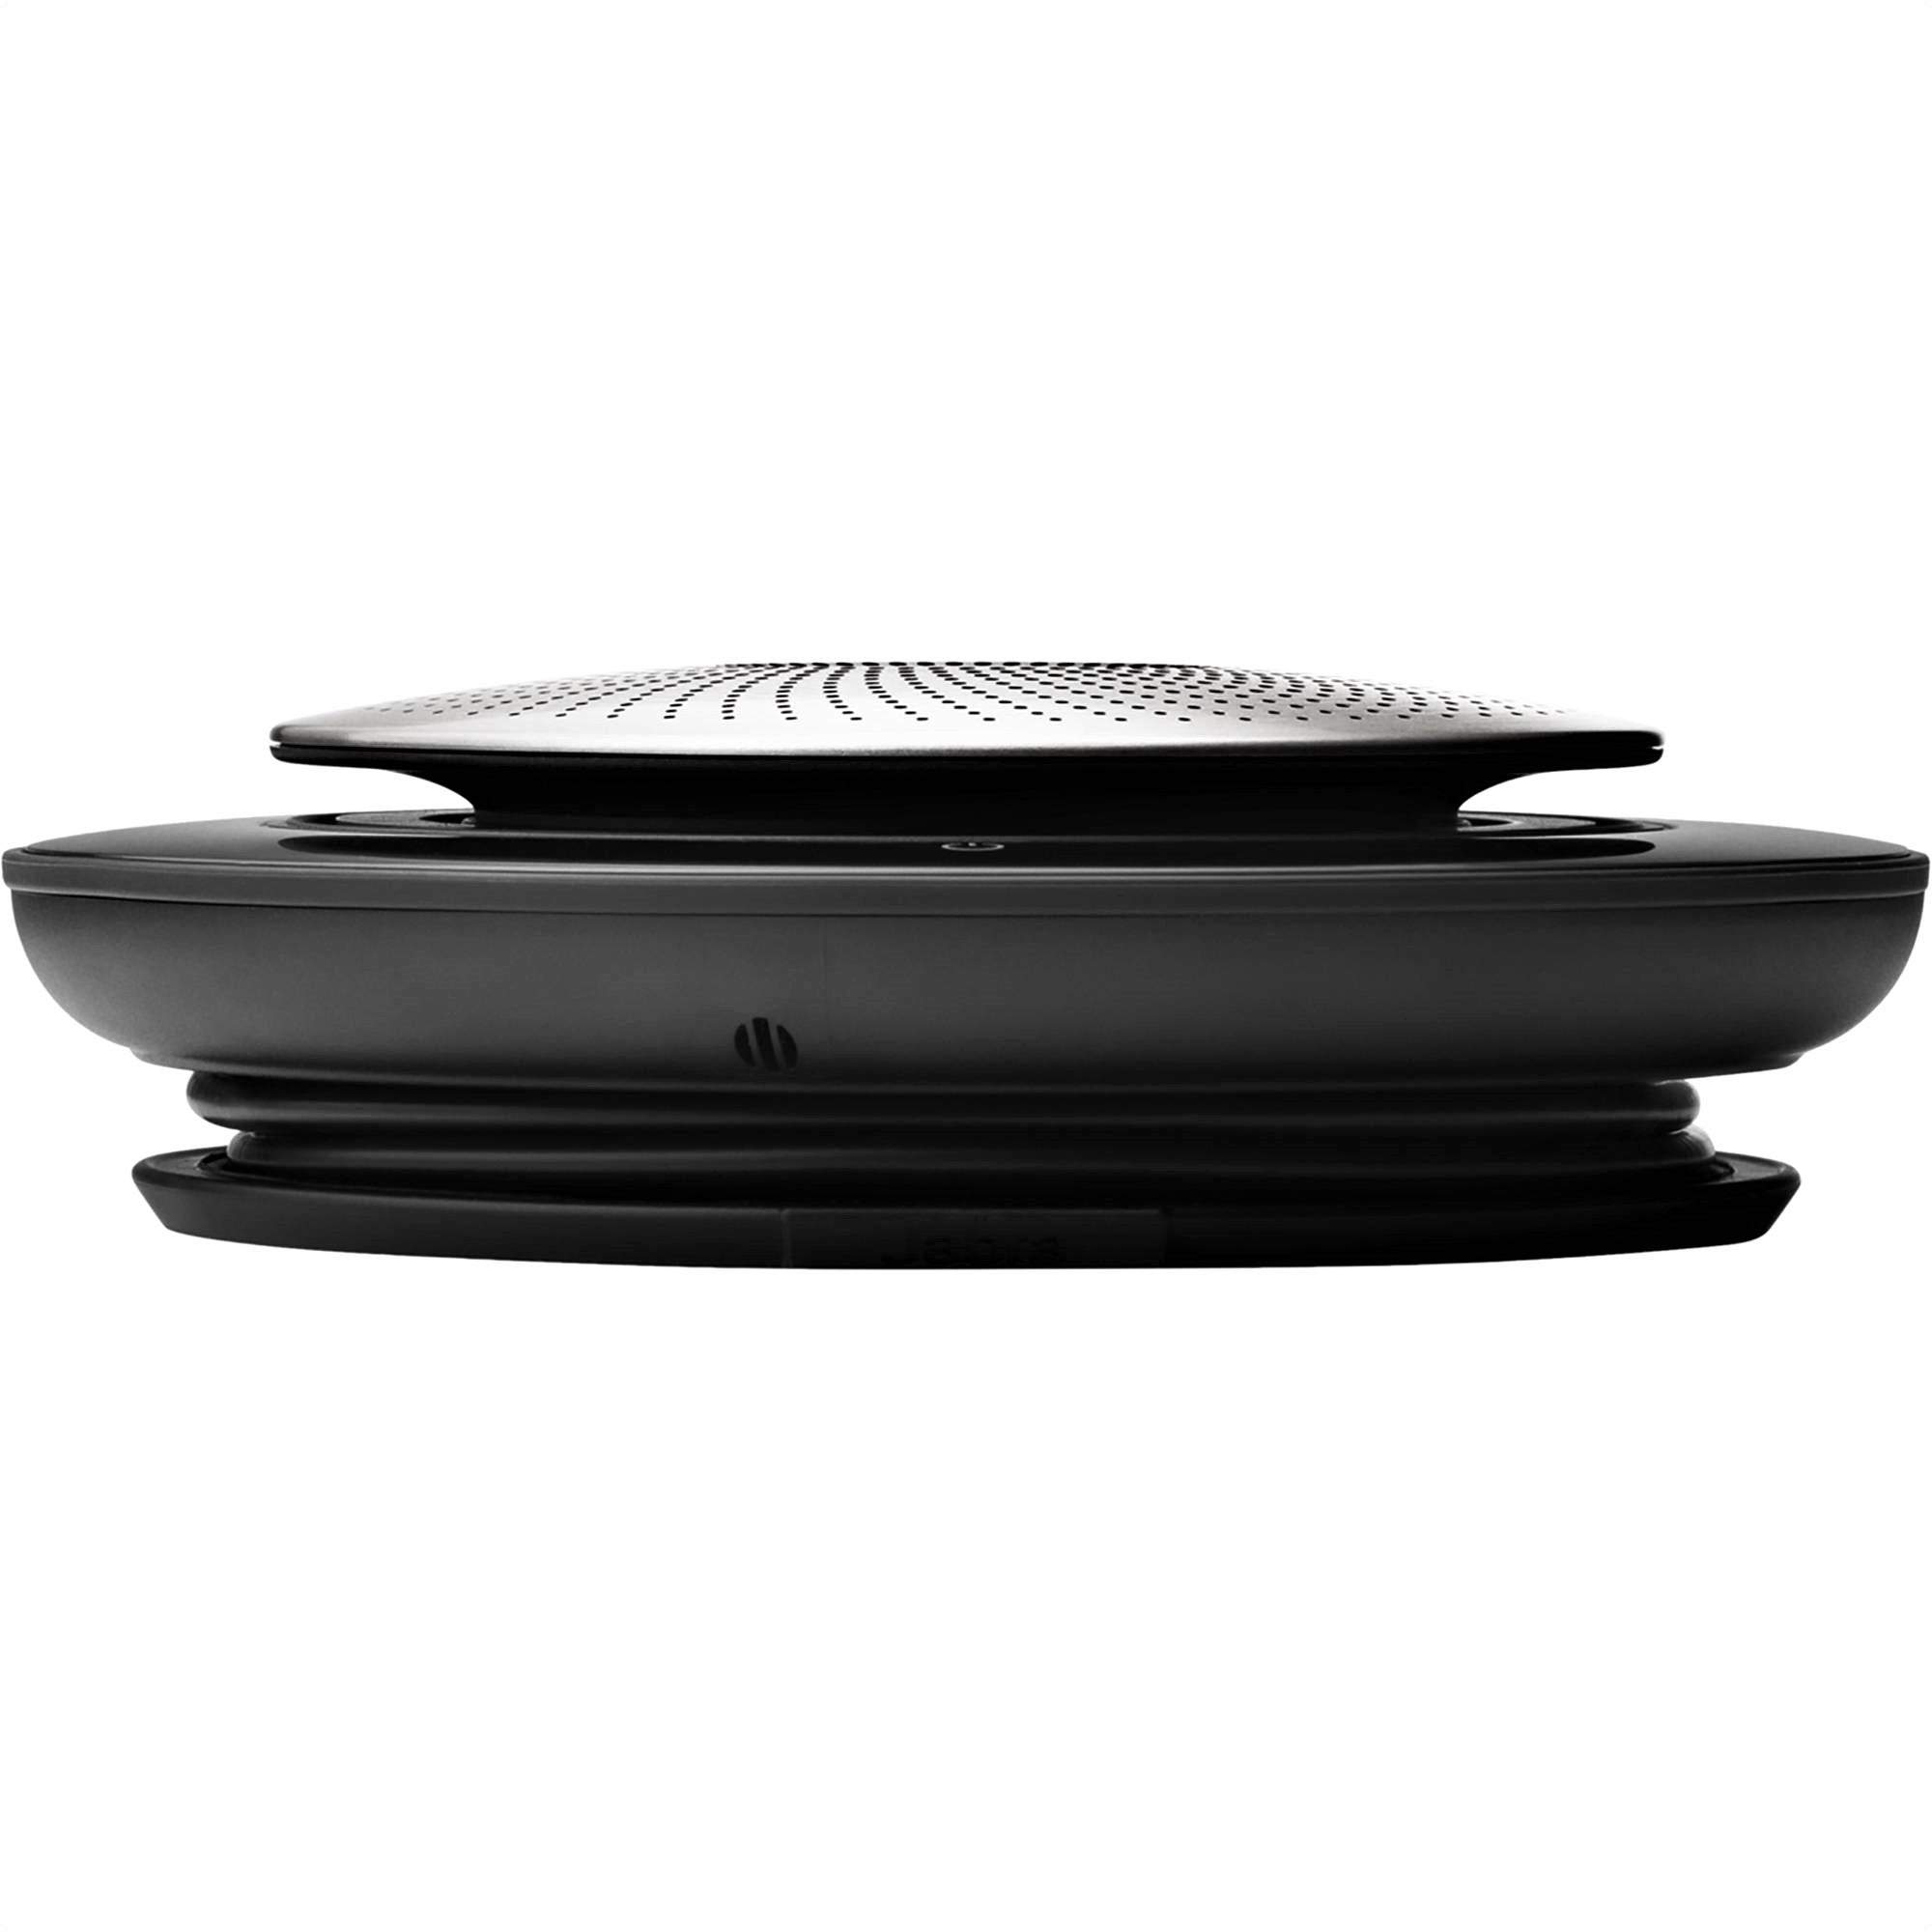 Jabra Speak 710 Speaker Phone - Microsoft Certified Portable Conference Speaker with Bluetooth Adapter and USB - Connect with Laptops, Smartphones and Tablets, Black